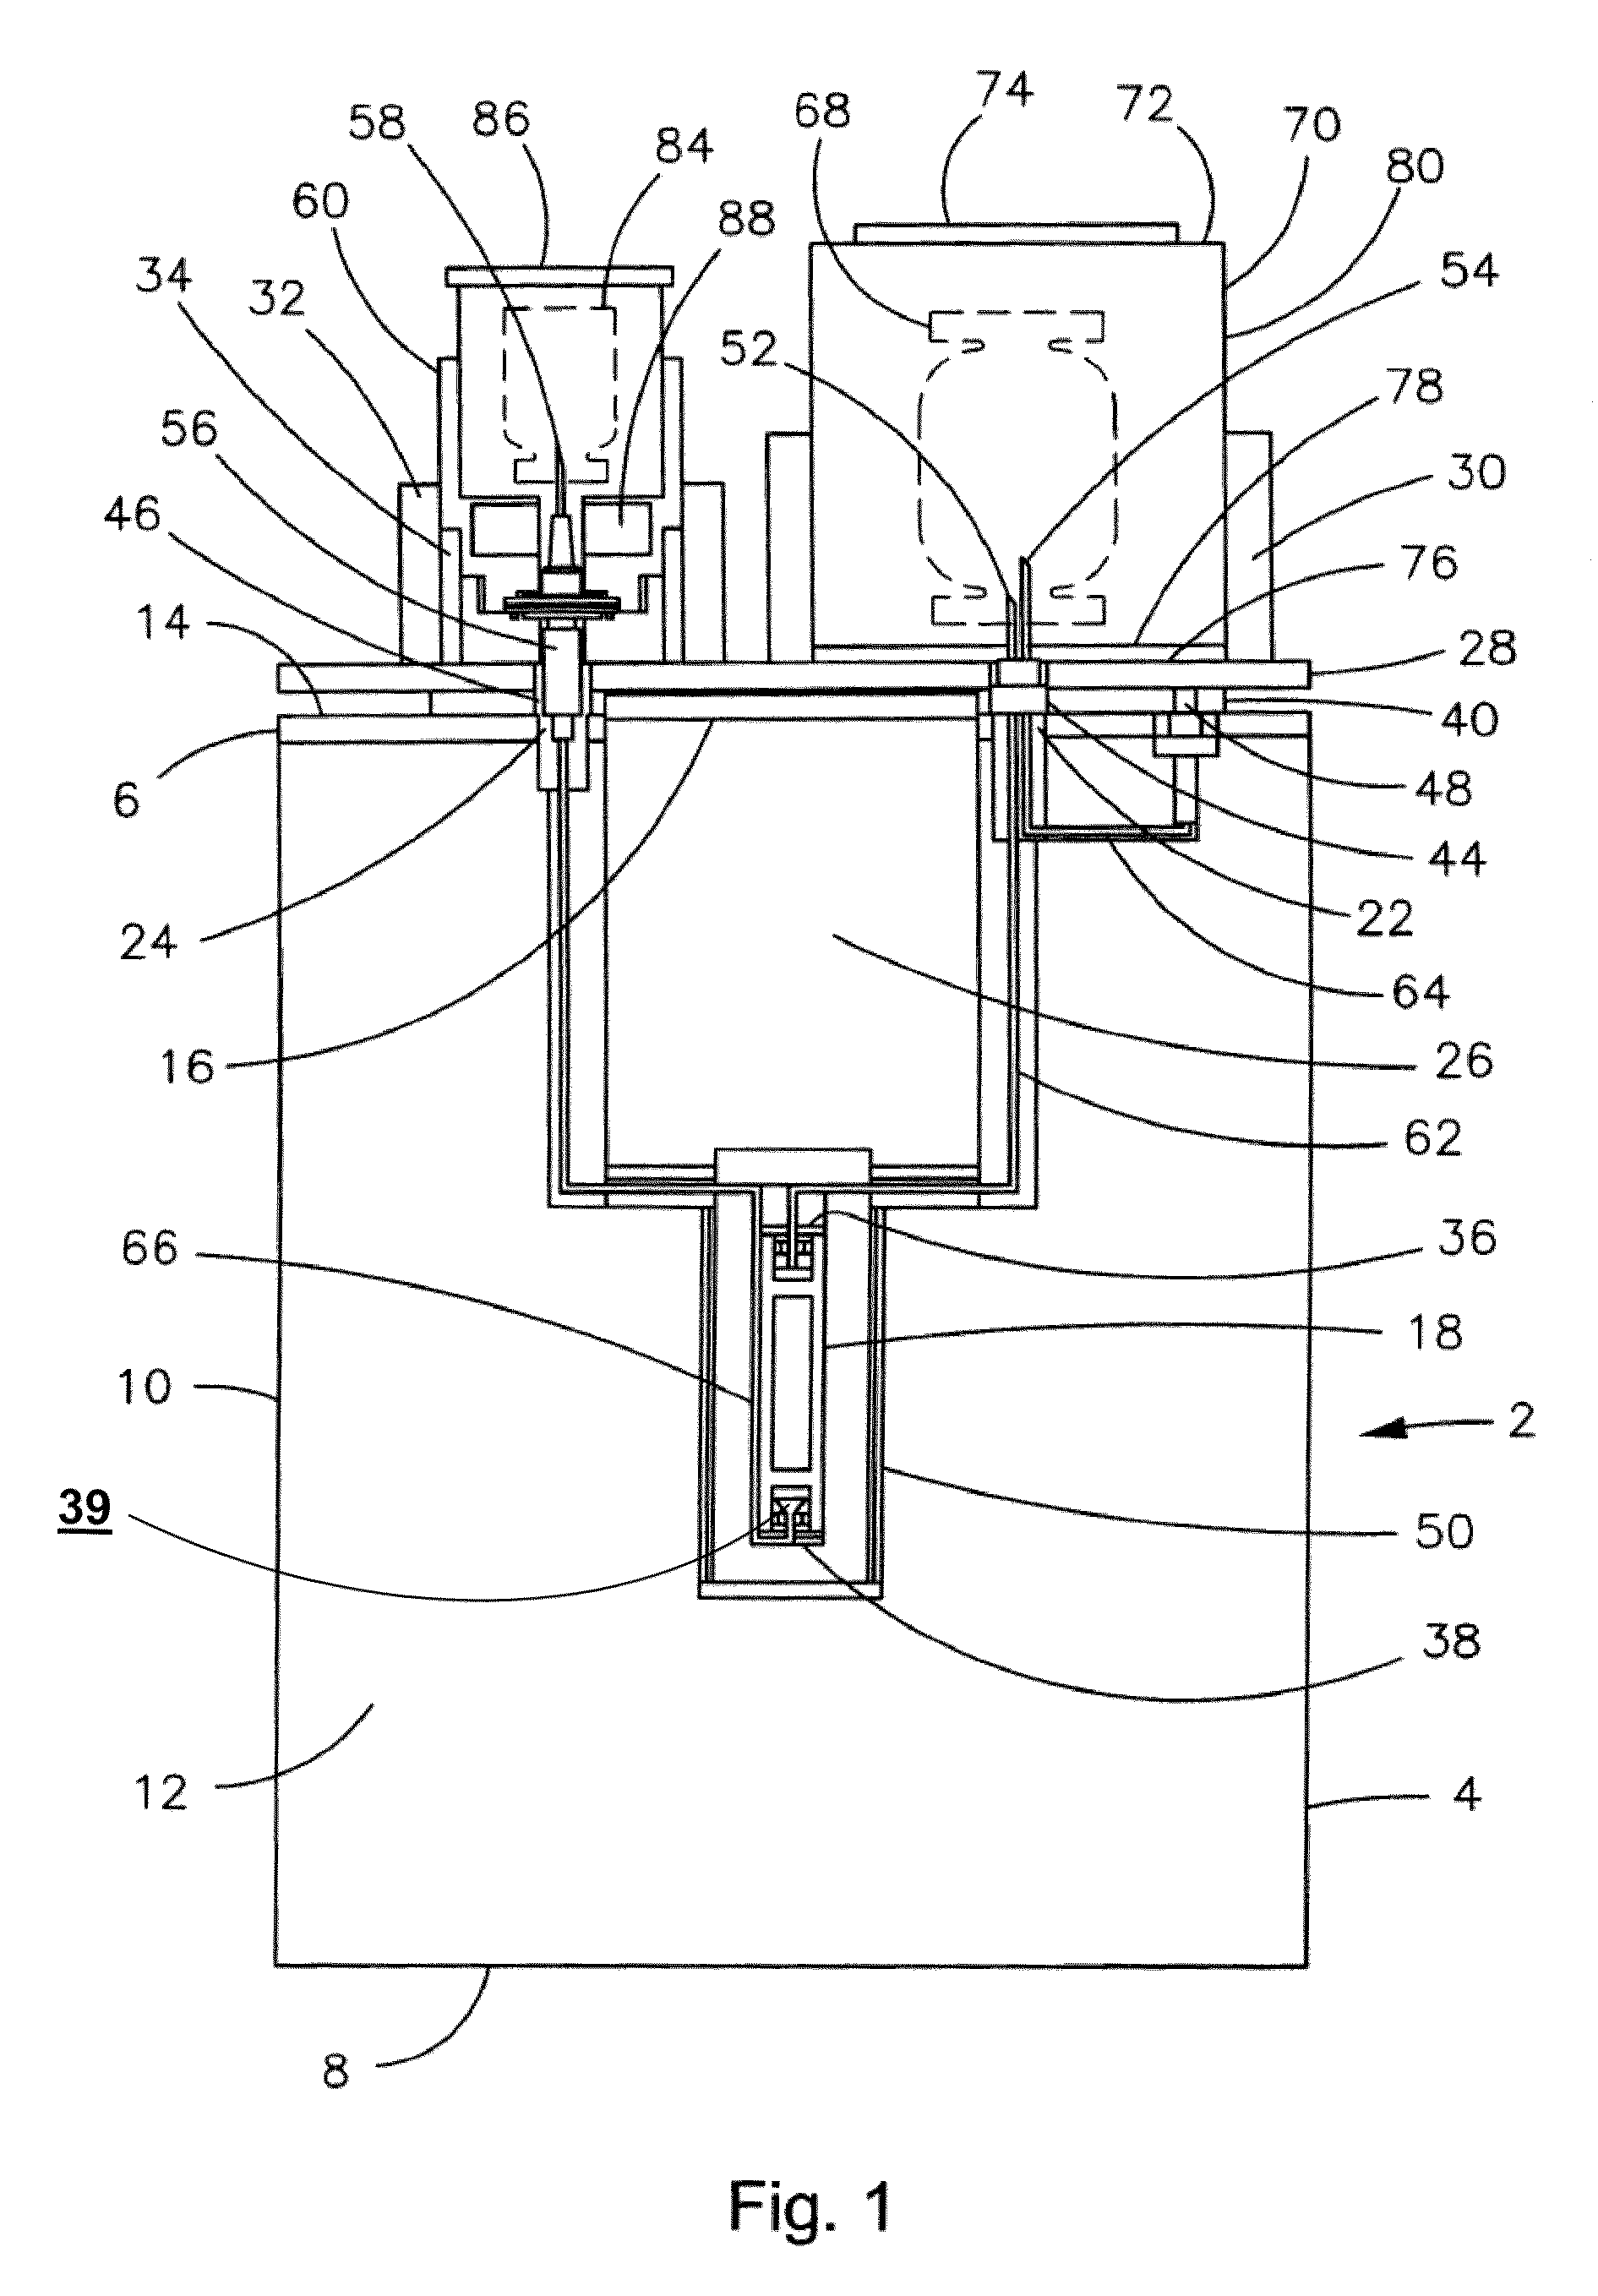 Systems and methods for radioisotope generation